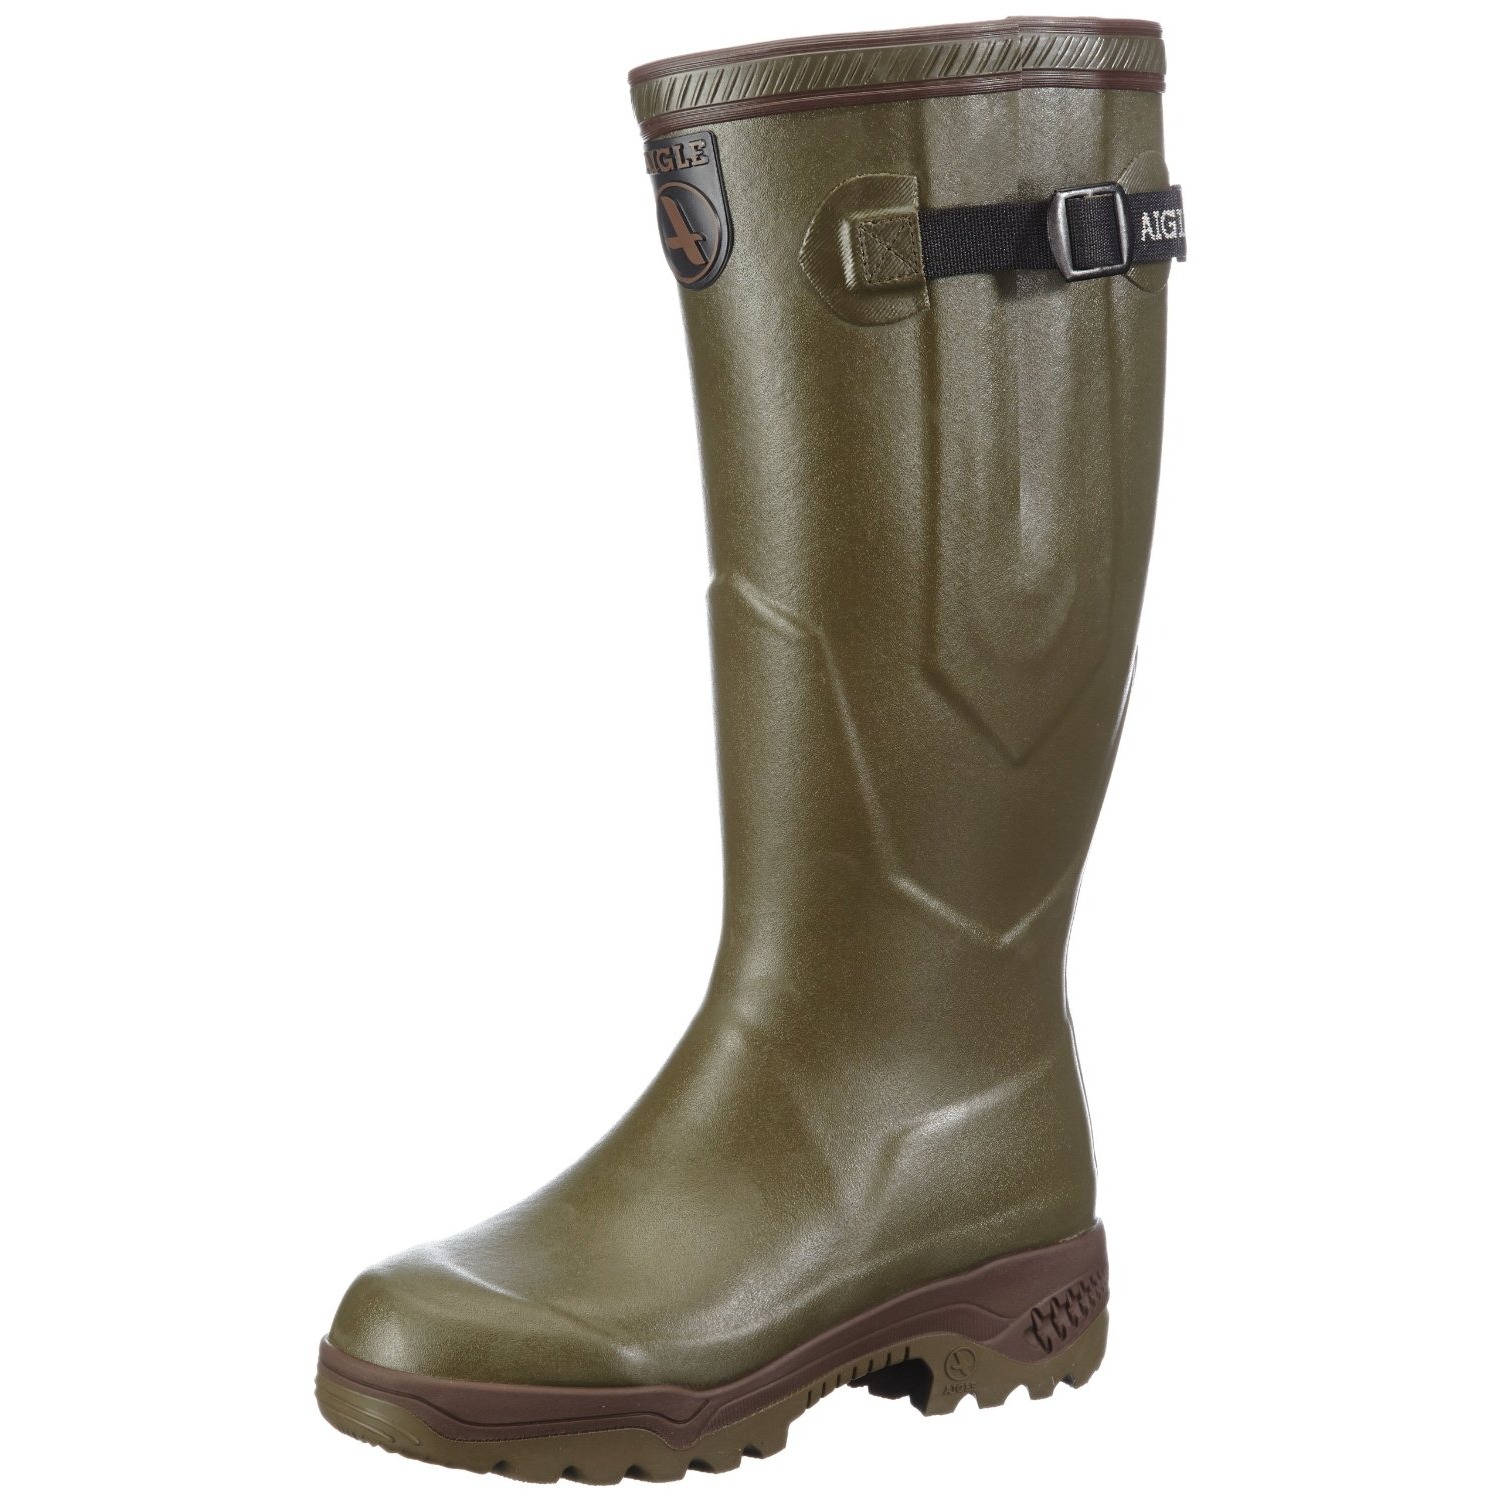 Aigle Wellies Parcours 2 ISO - Latest edition Insulated Wellington ...